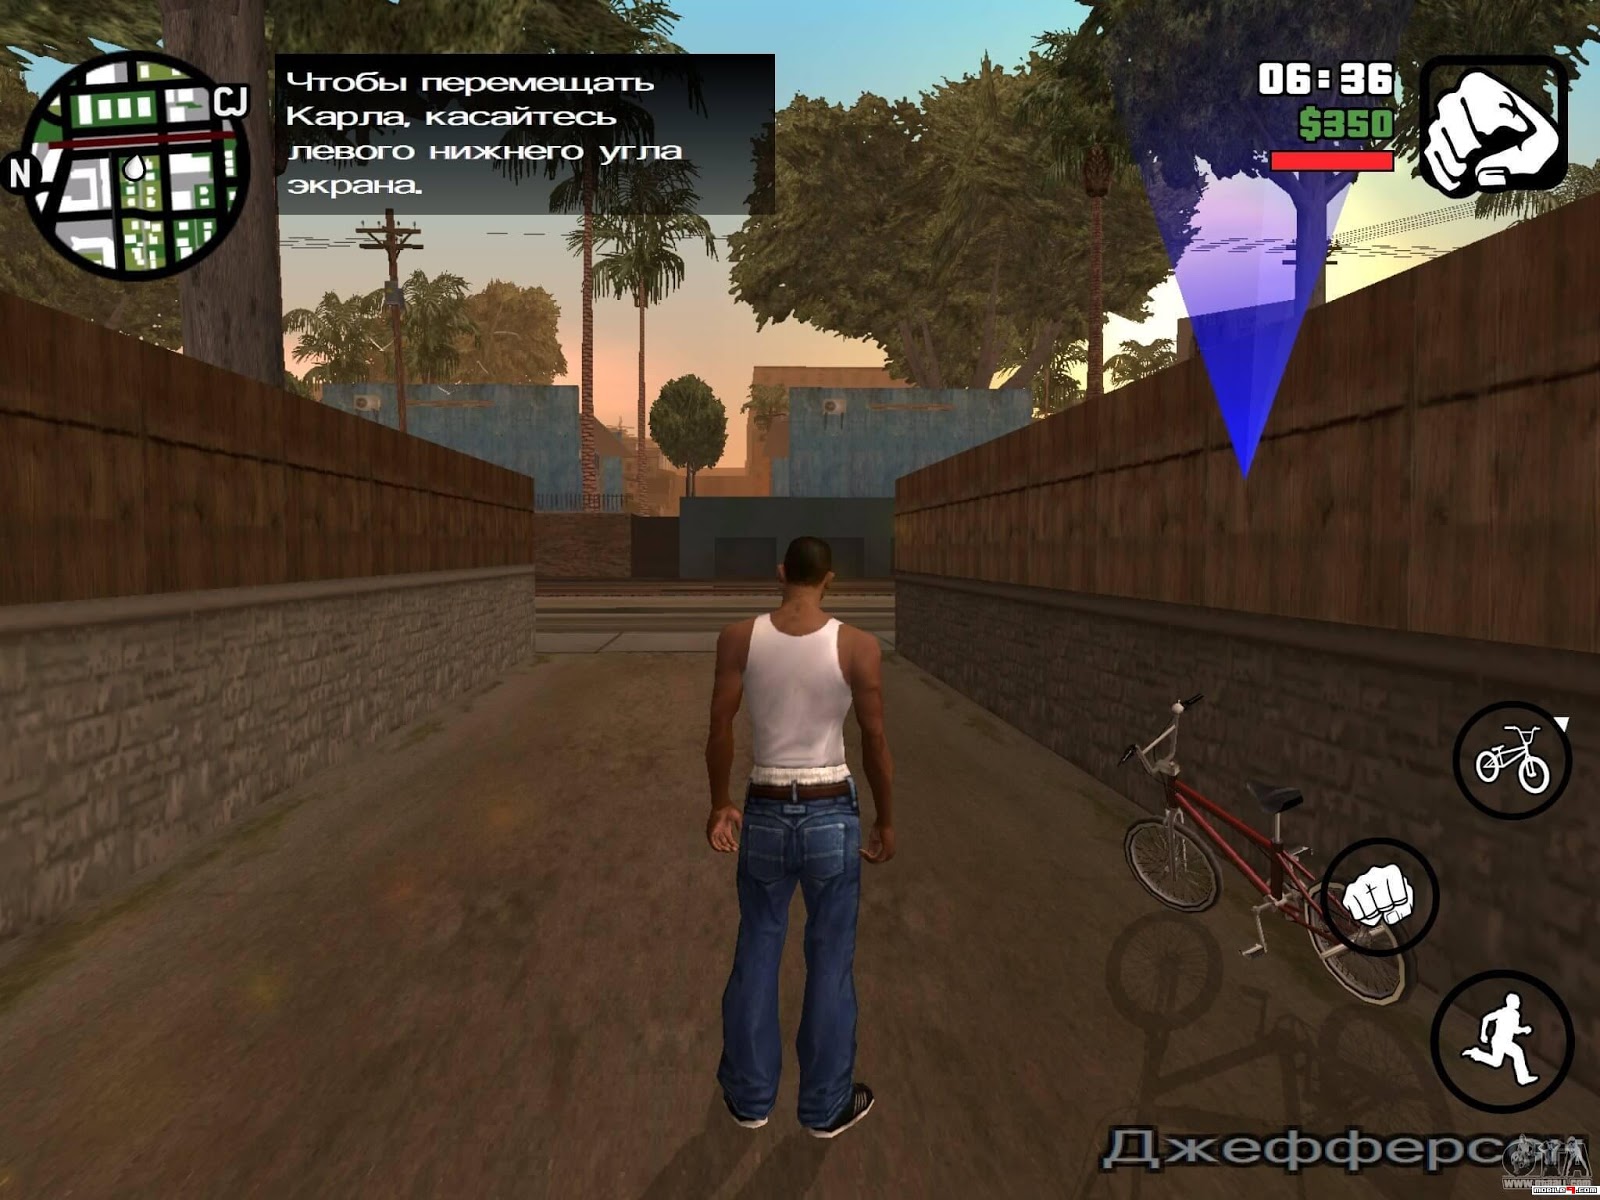 Download and Play Gta San Andreas in Android